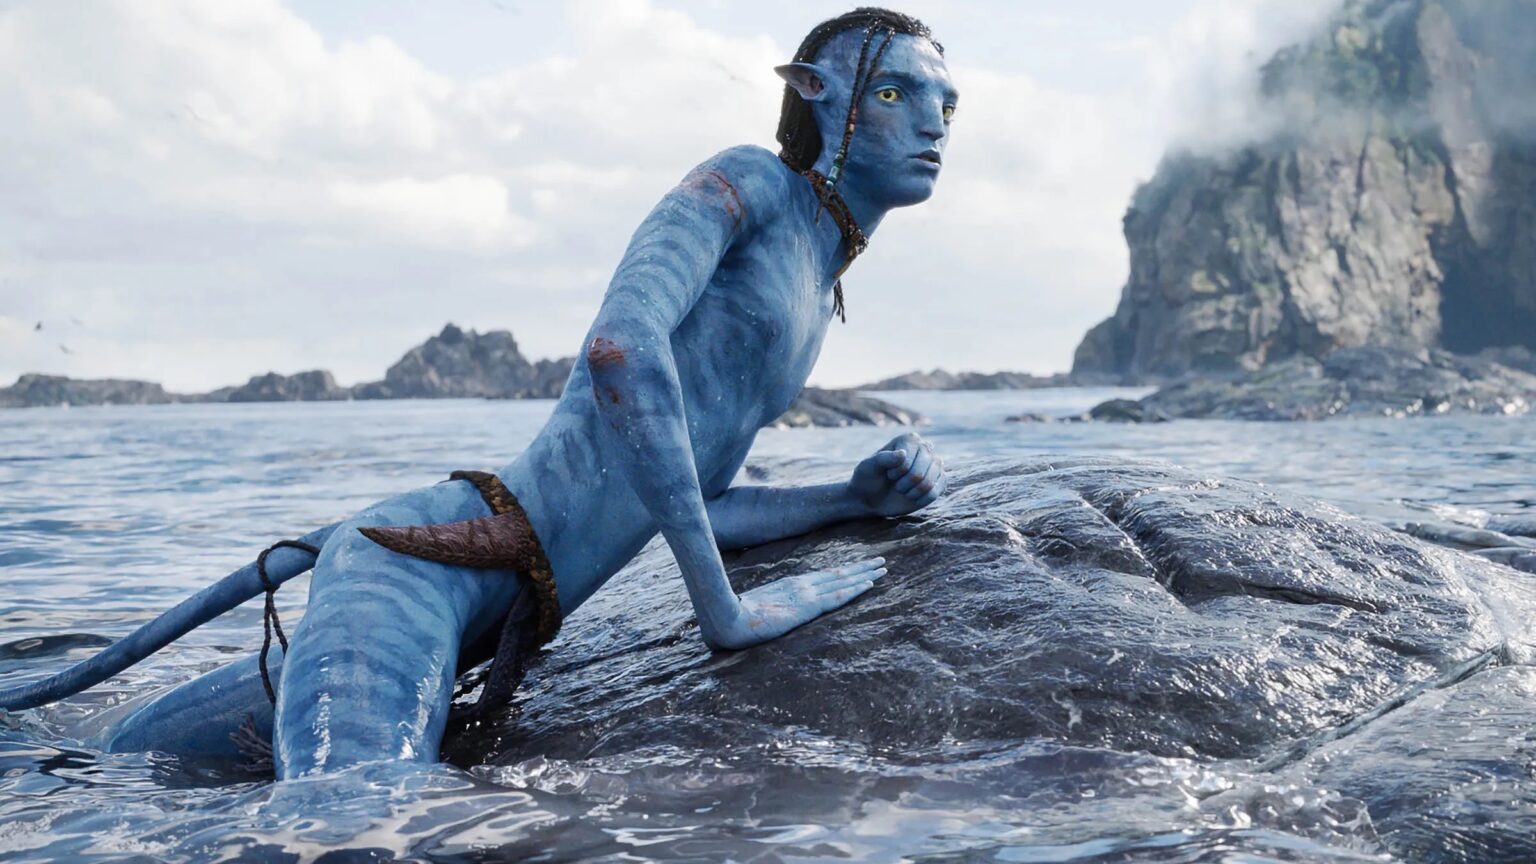 Are you ready to dive into the world of Pandora once again in 'Avatar 2'? Here’s how you can watch the full movie for free.